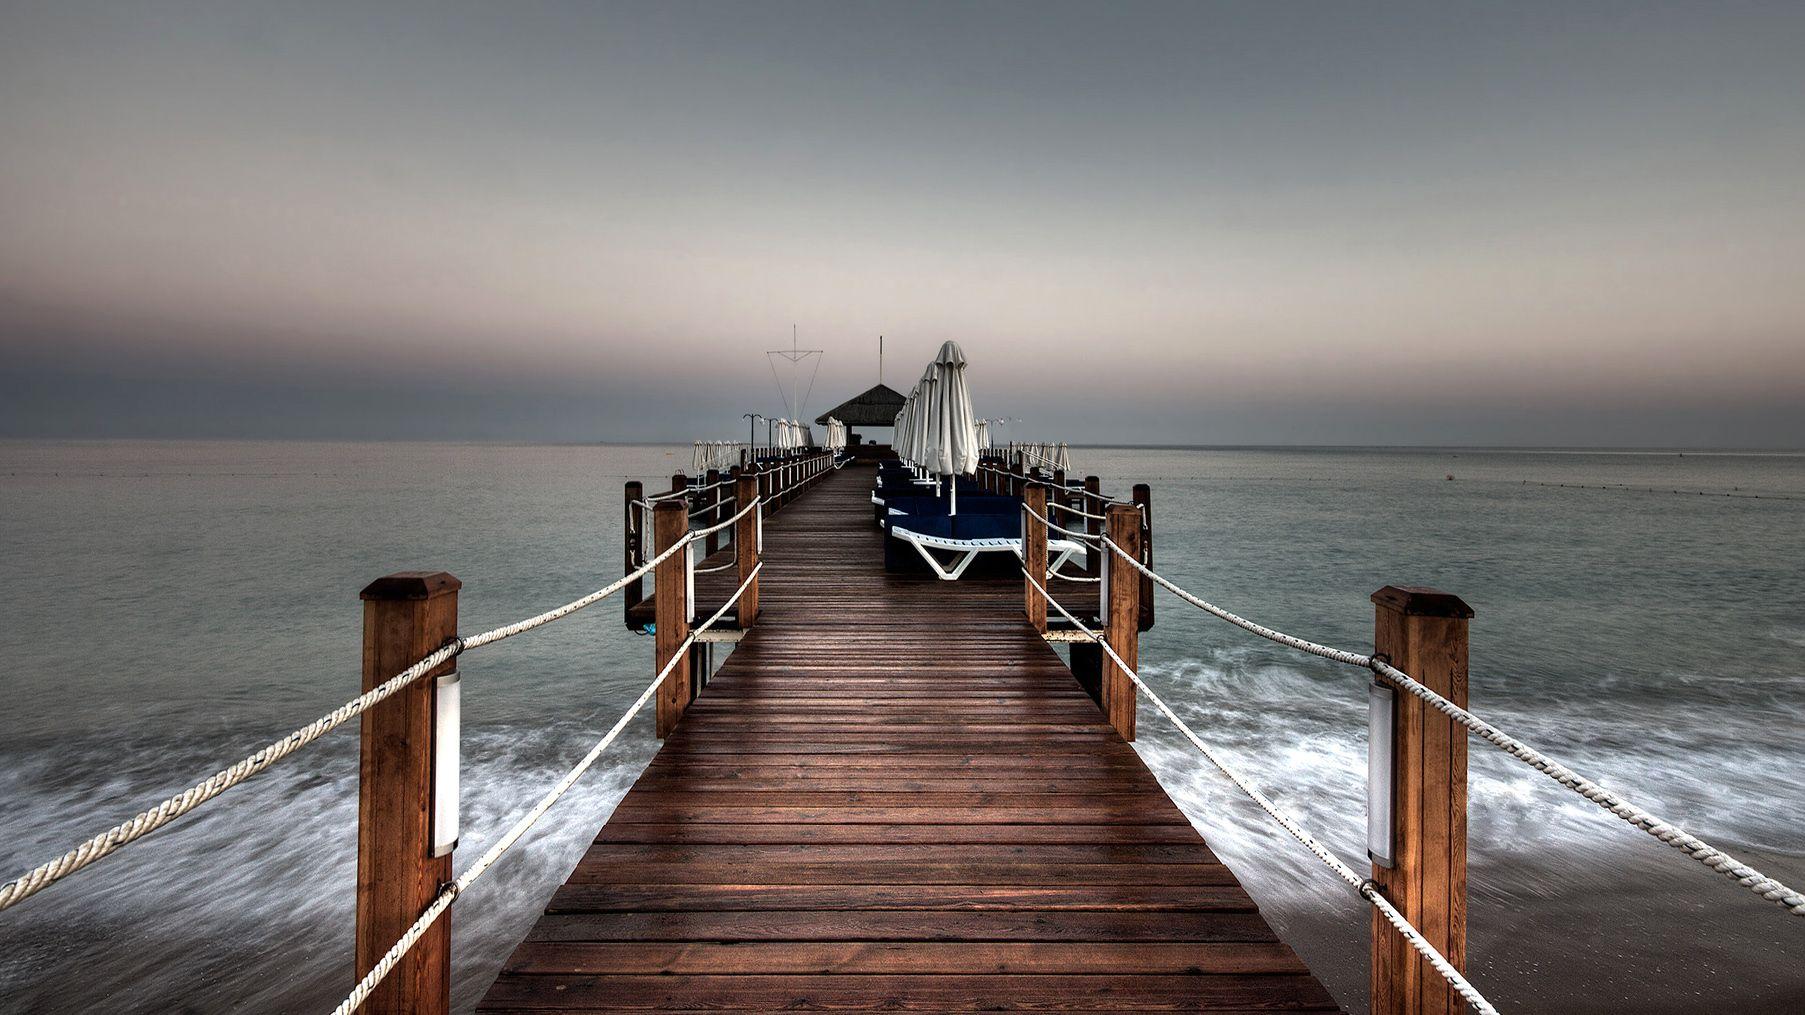 Turkish, Pier, Before, Storm, Cool Nature Wallpaper, Amazing